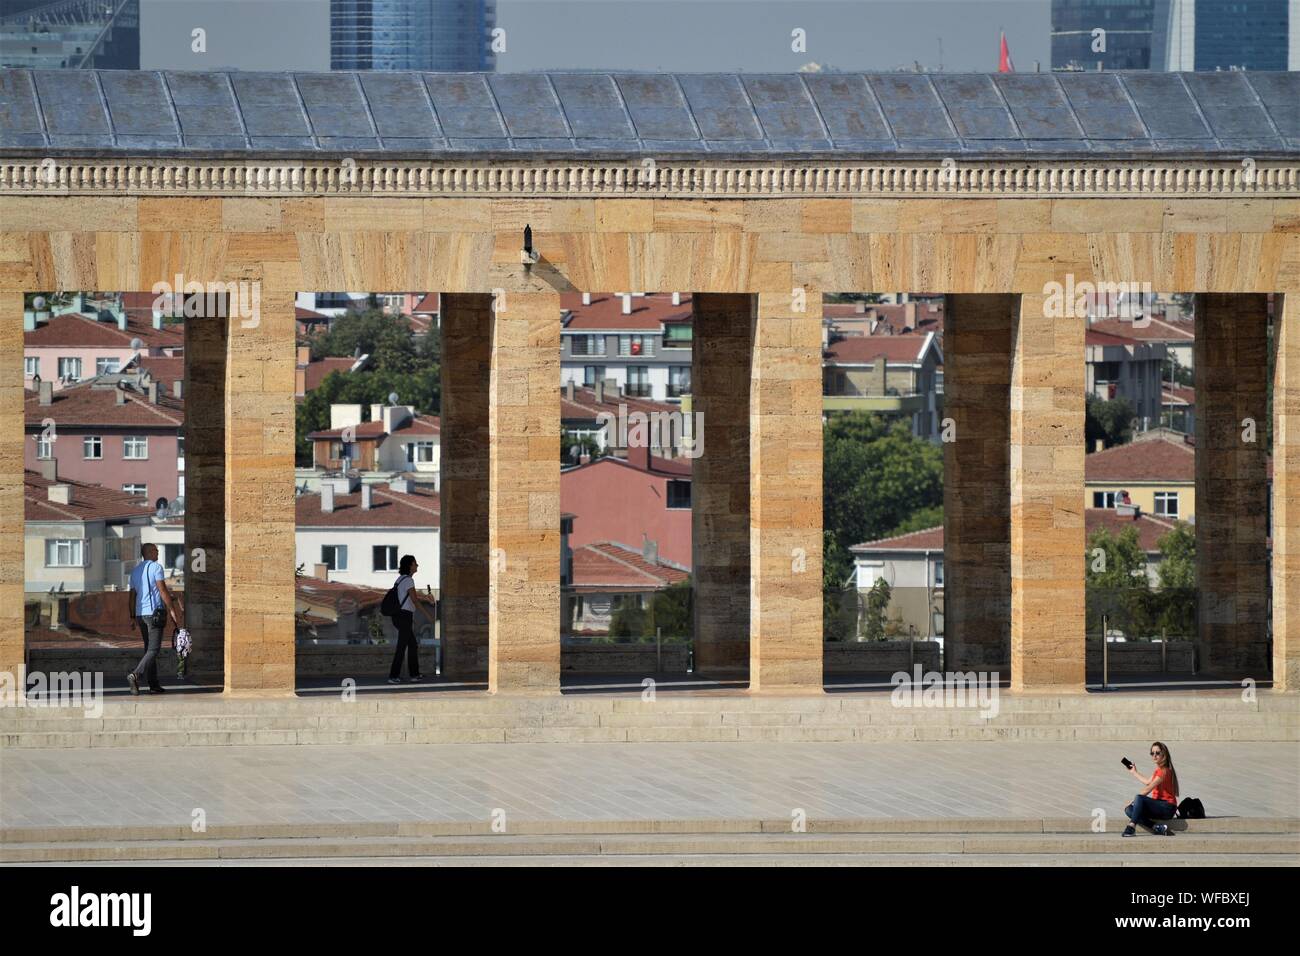 Ankara, Turkey. 31st Aug, 2019. People visit Anitkabir, the mausoleum of modern Turkey's founder Mustafa Kemal Ataturk, a day after the 97th anniversary of Victory Day, which commemorates the defeat of the Greek forces at the hands of the Turks in the Battle of Dumlupinar in 1922. Credit: Altan Gocher/ZUMA Wire/Alamy Live News Stock Photo